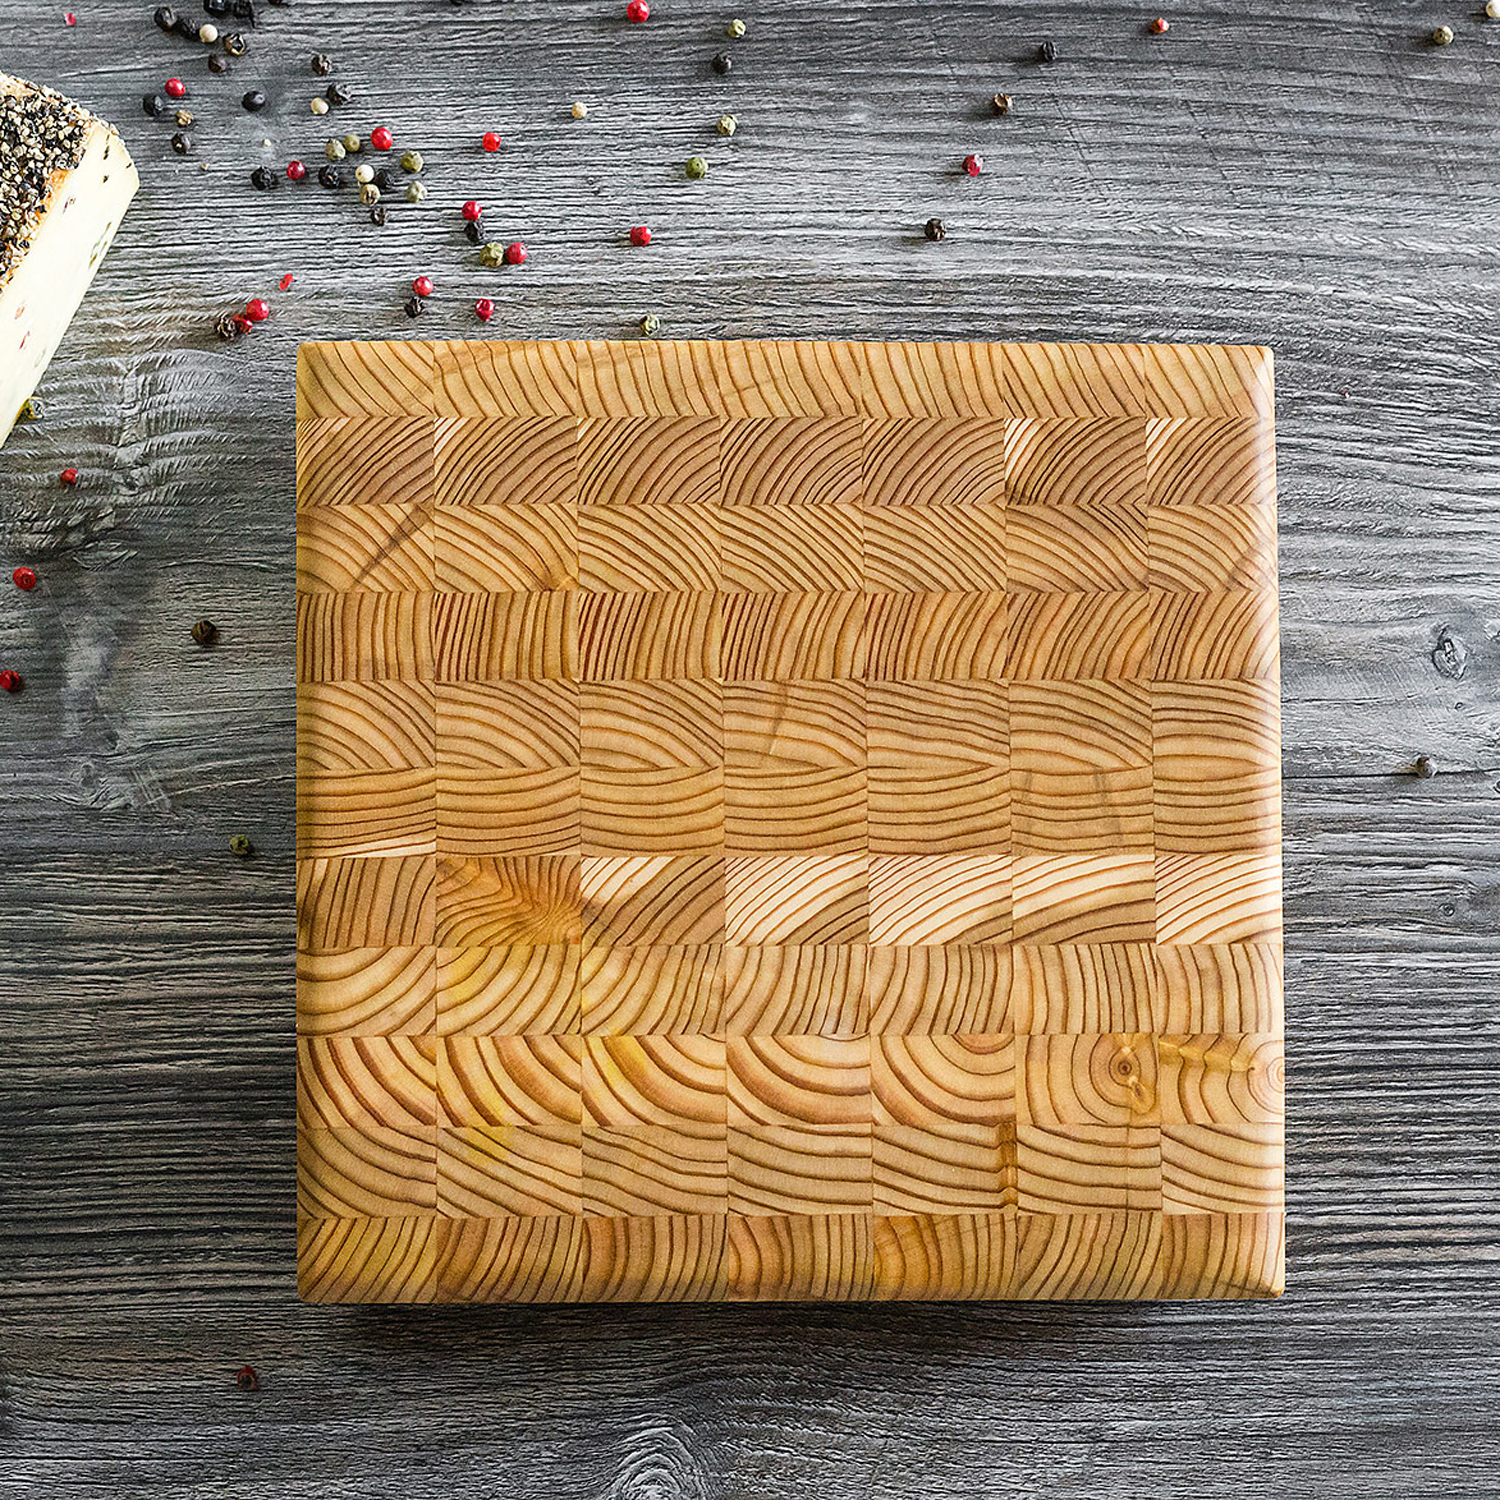 Larch Wood: Square Cheese Board Product Image 1 of 5